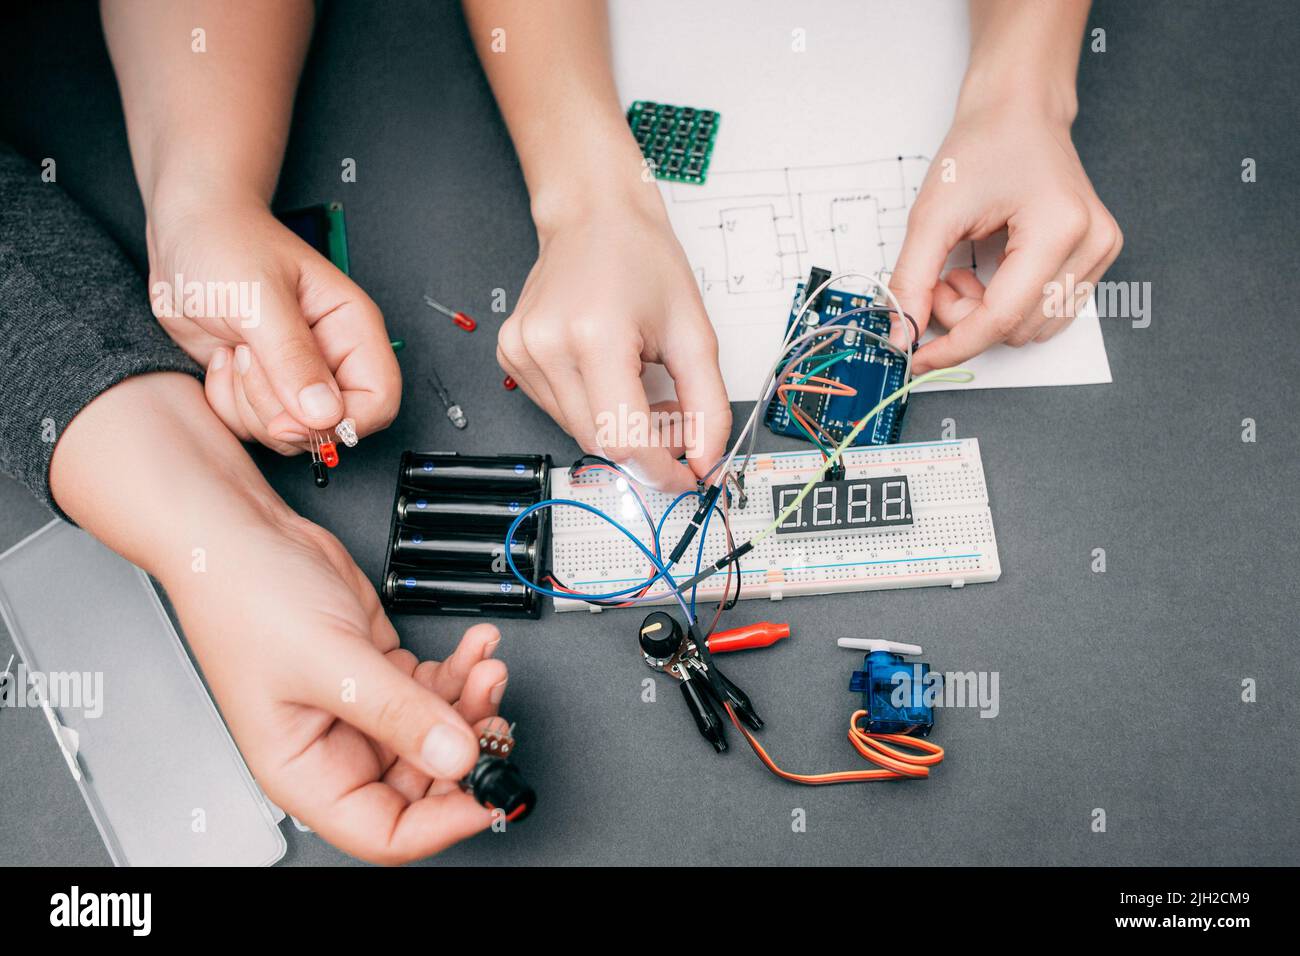 Engineers hands connecting electronic components Stock Photo